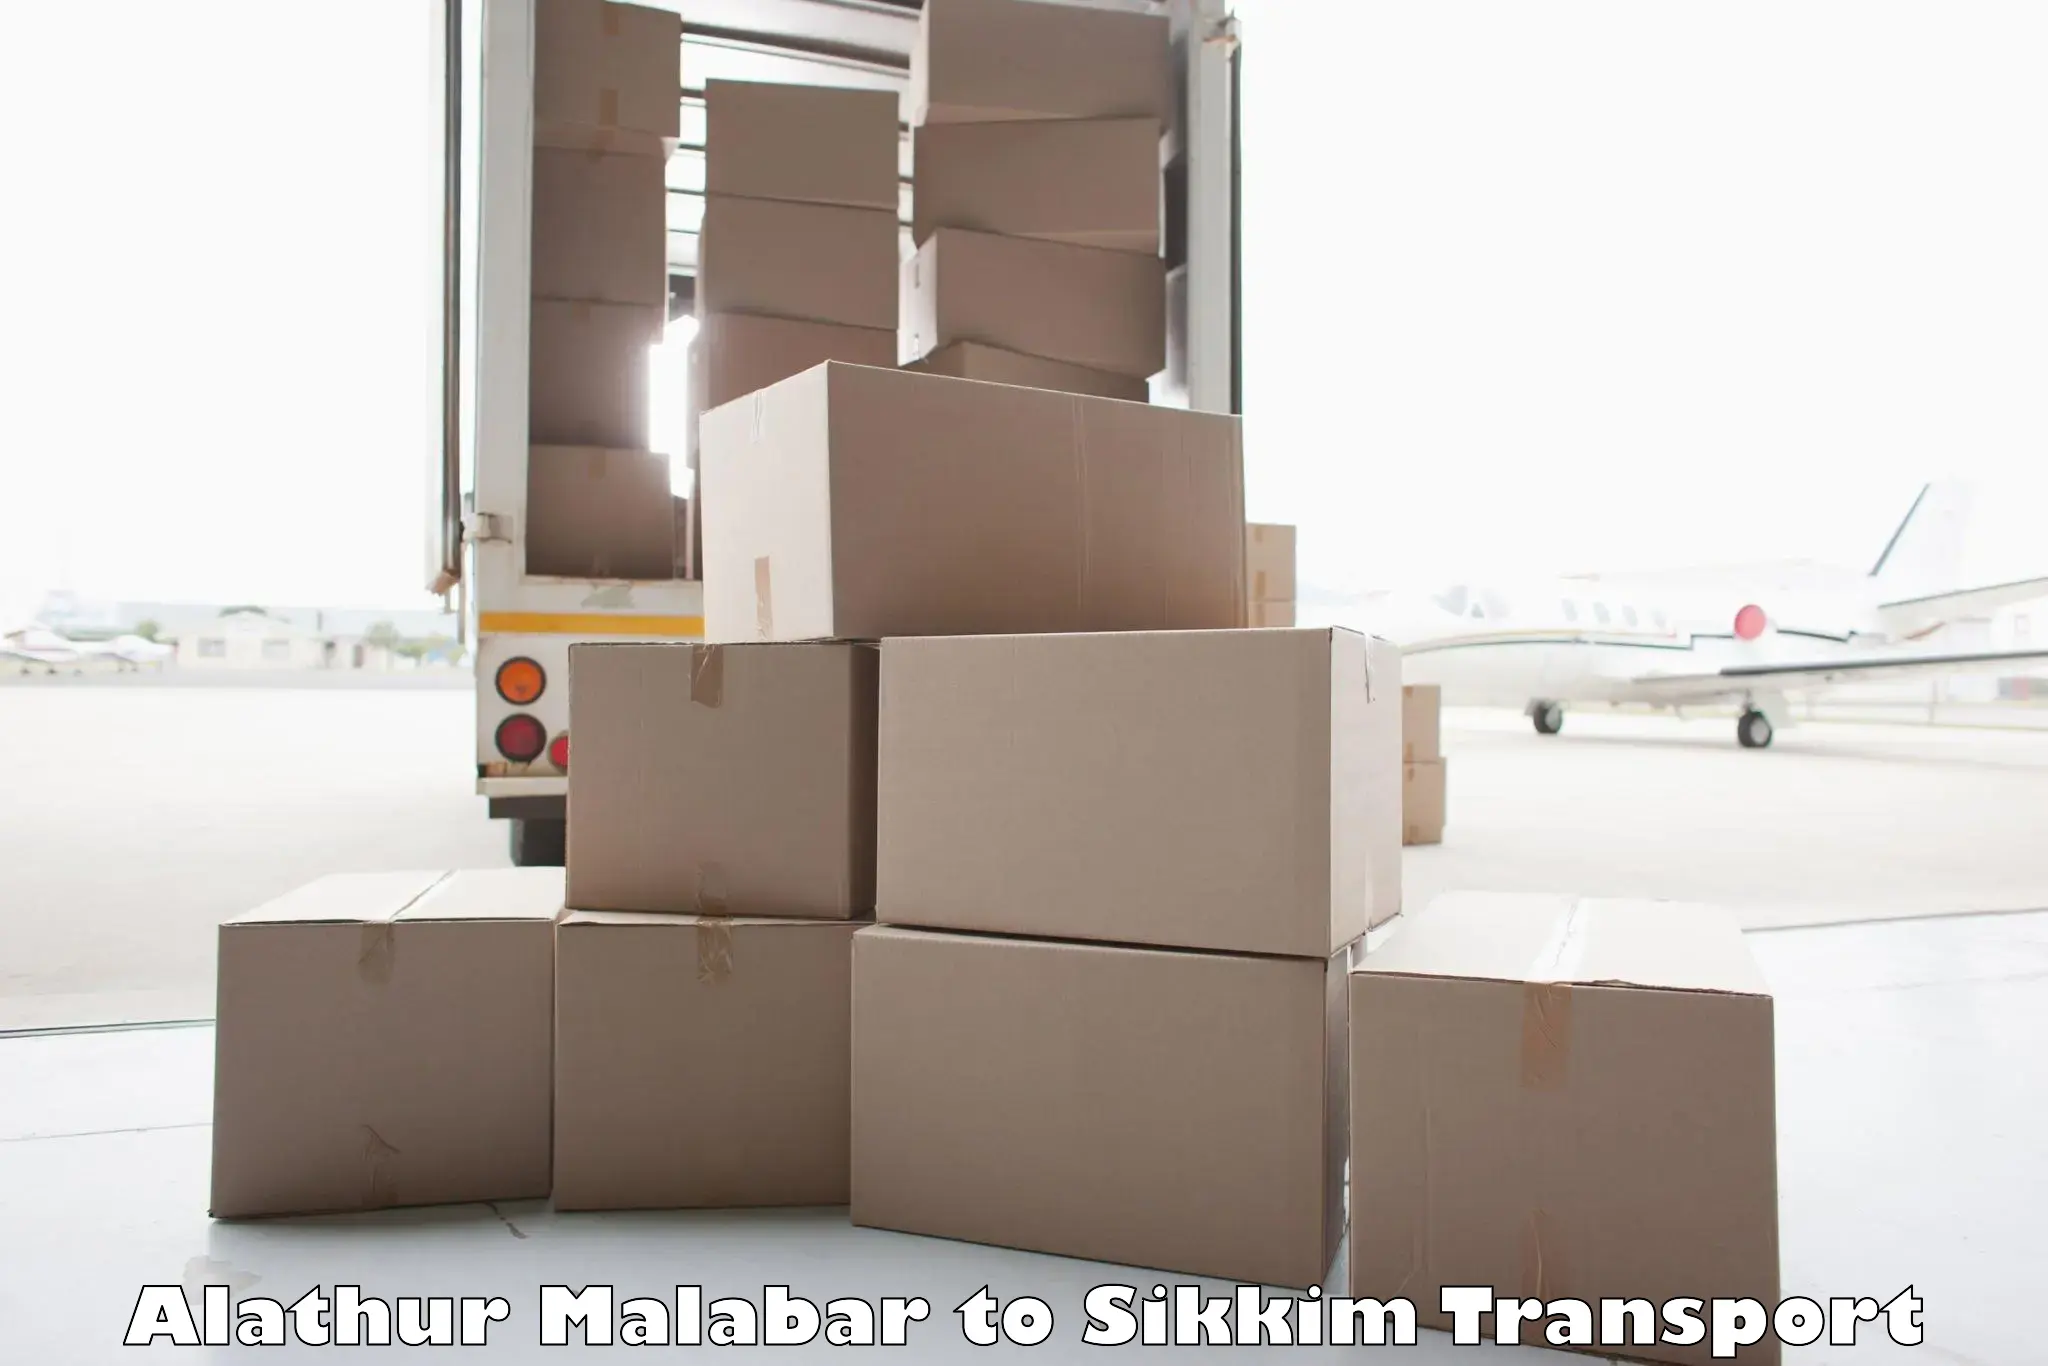 Shipping services Alathur Malabar to Pelling